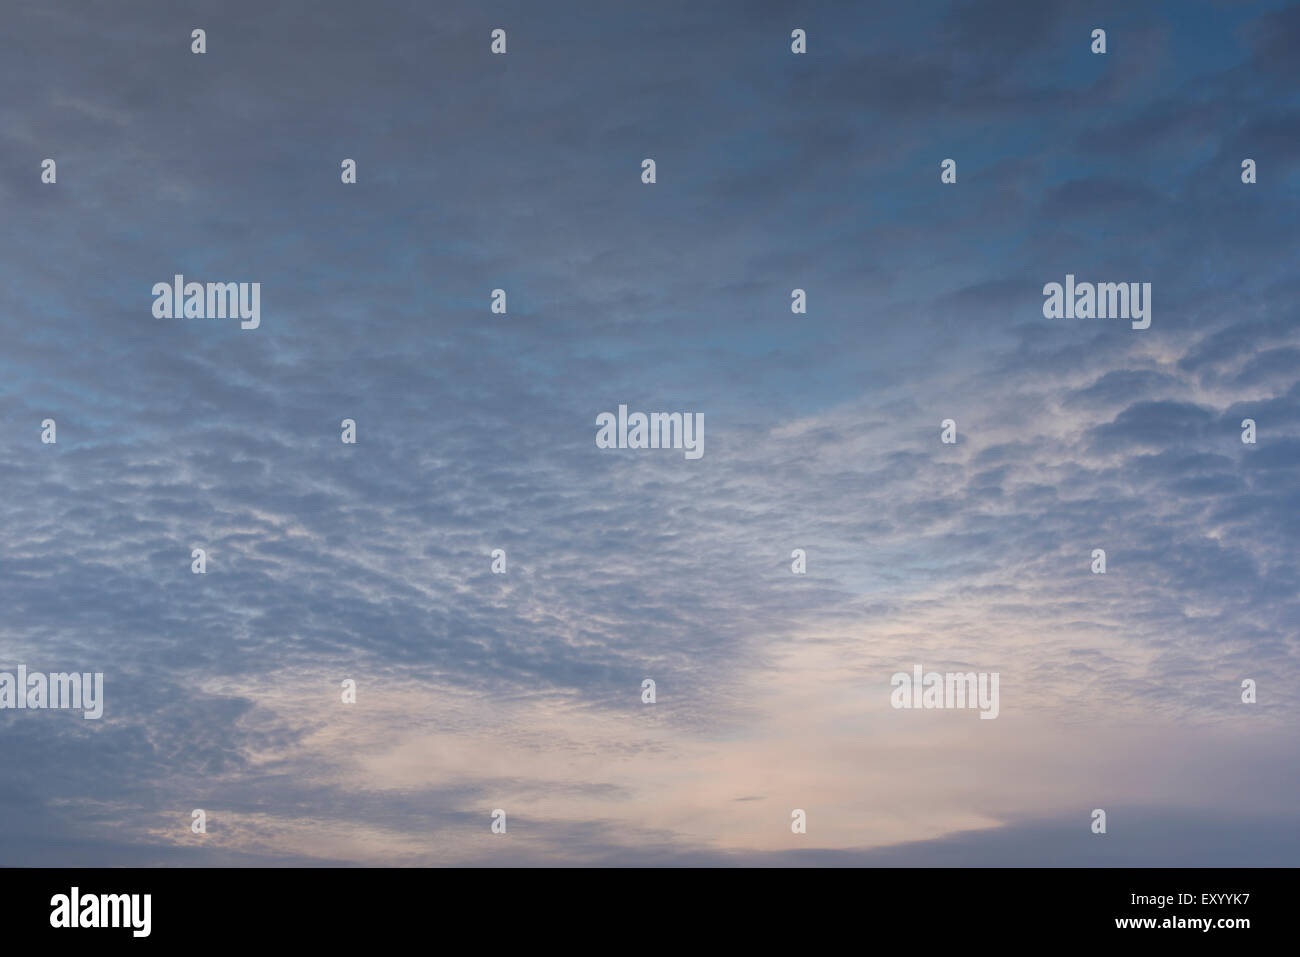 Blue evening sky scattered with altocumulus clouds Stock Photo